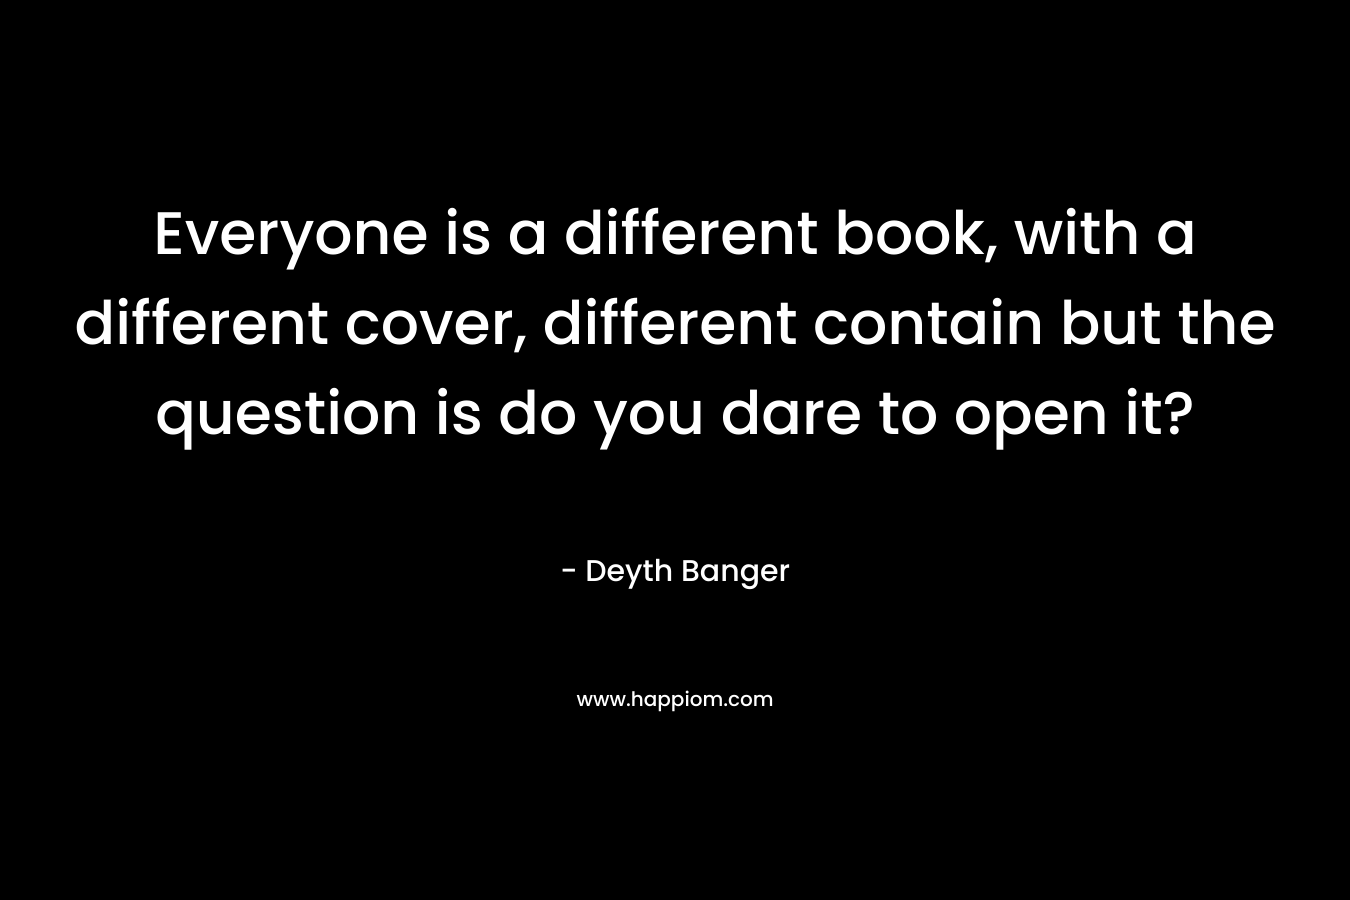 Everyone is a different book, with a different cover, different contain but the question is do you dare to open it?